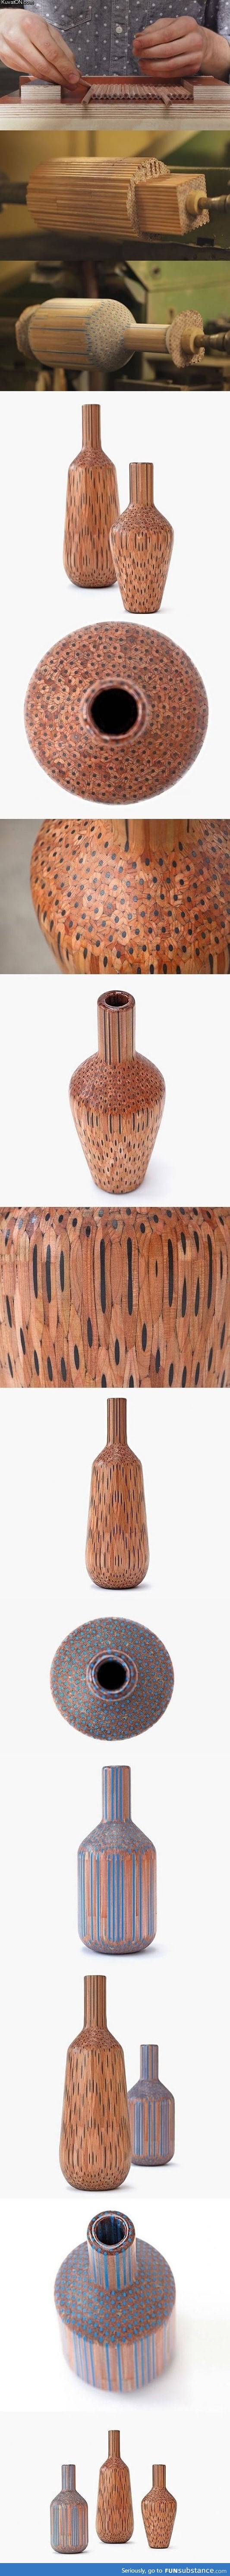 Pencil carved art